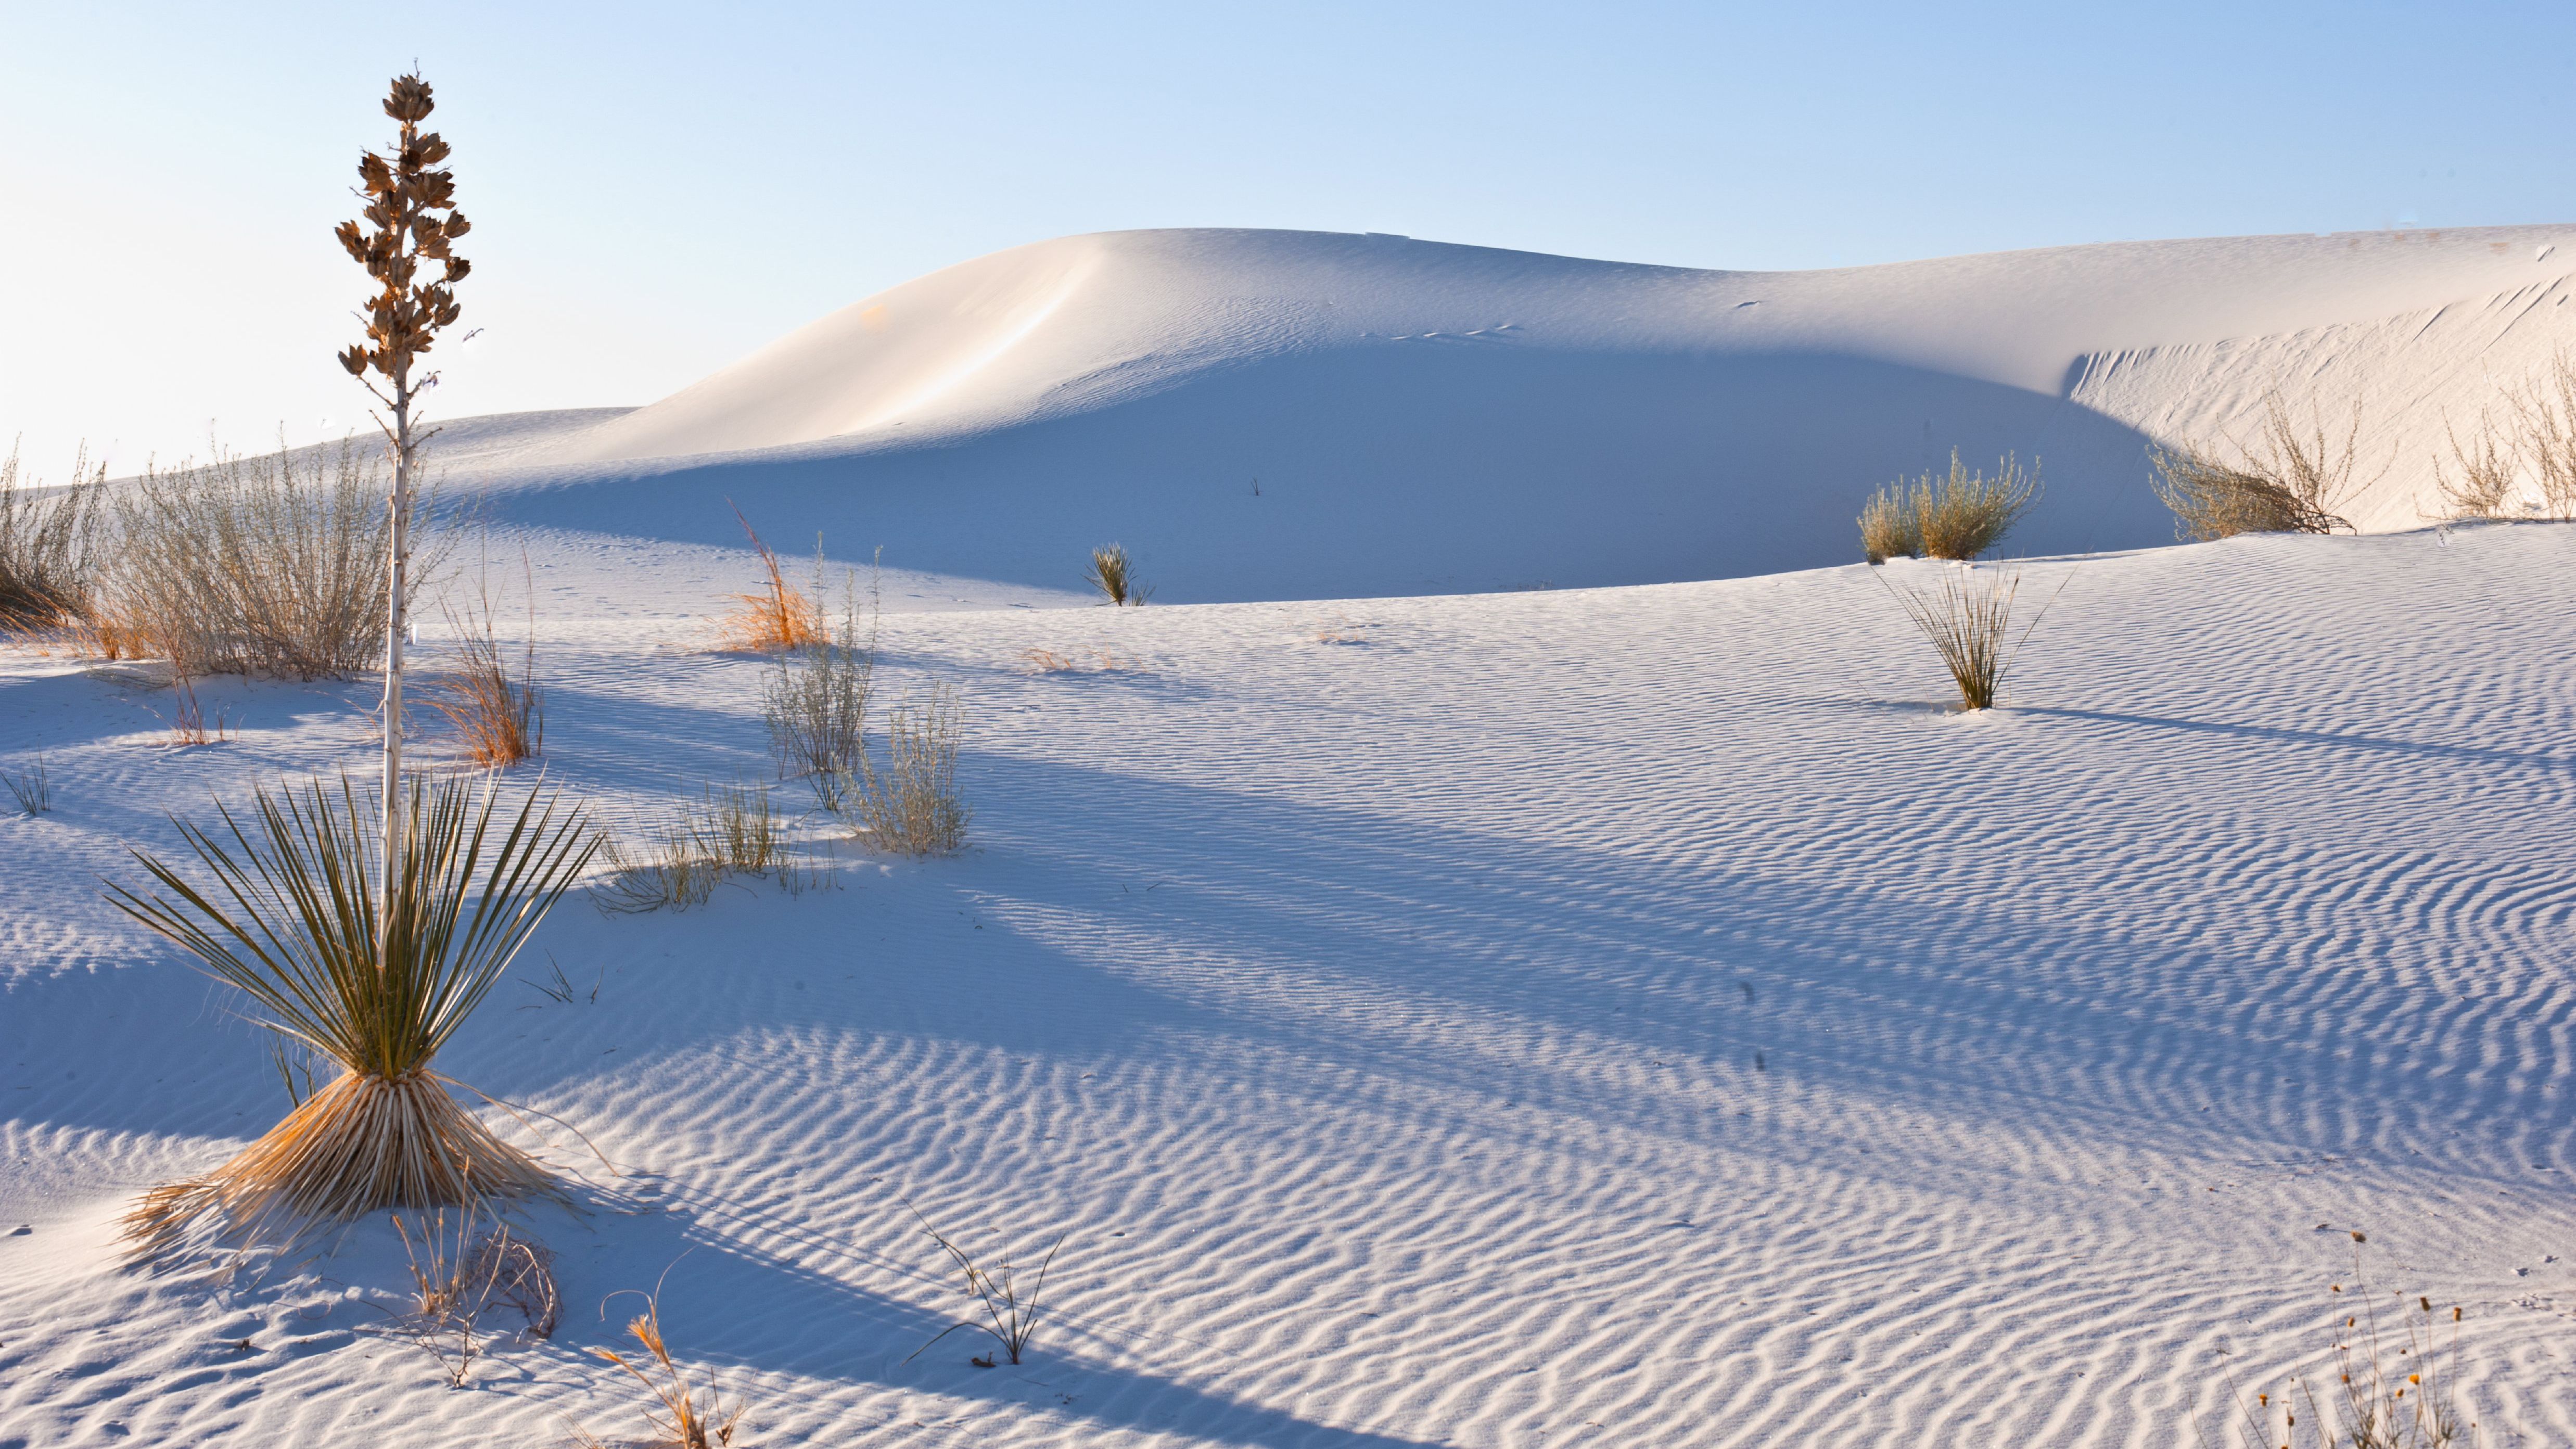 White Sands National Monument is newest national park in the US